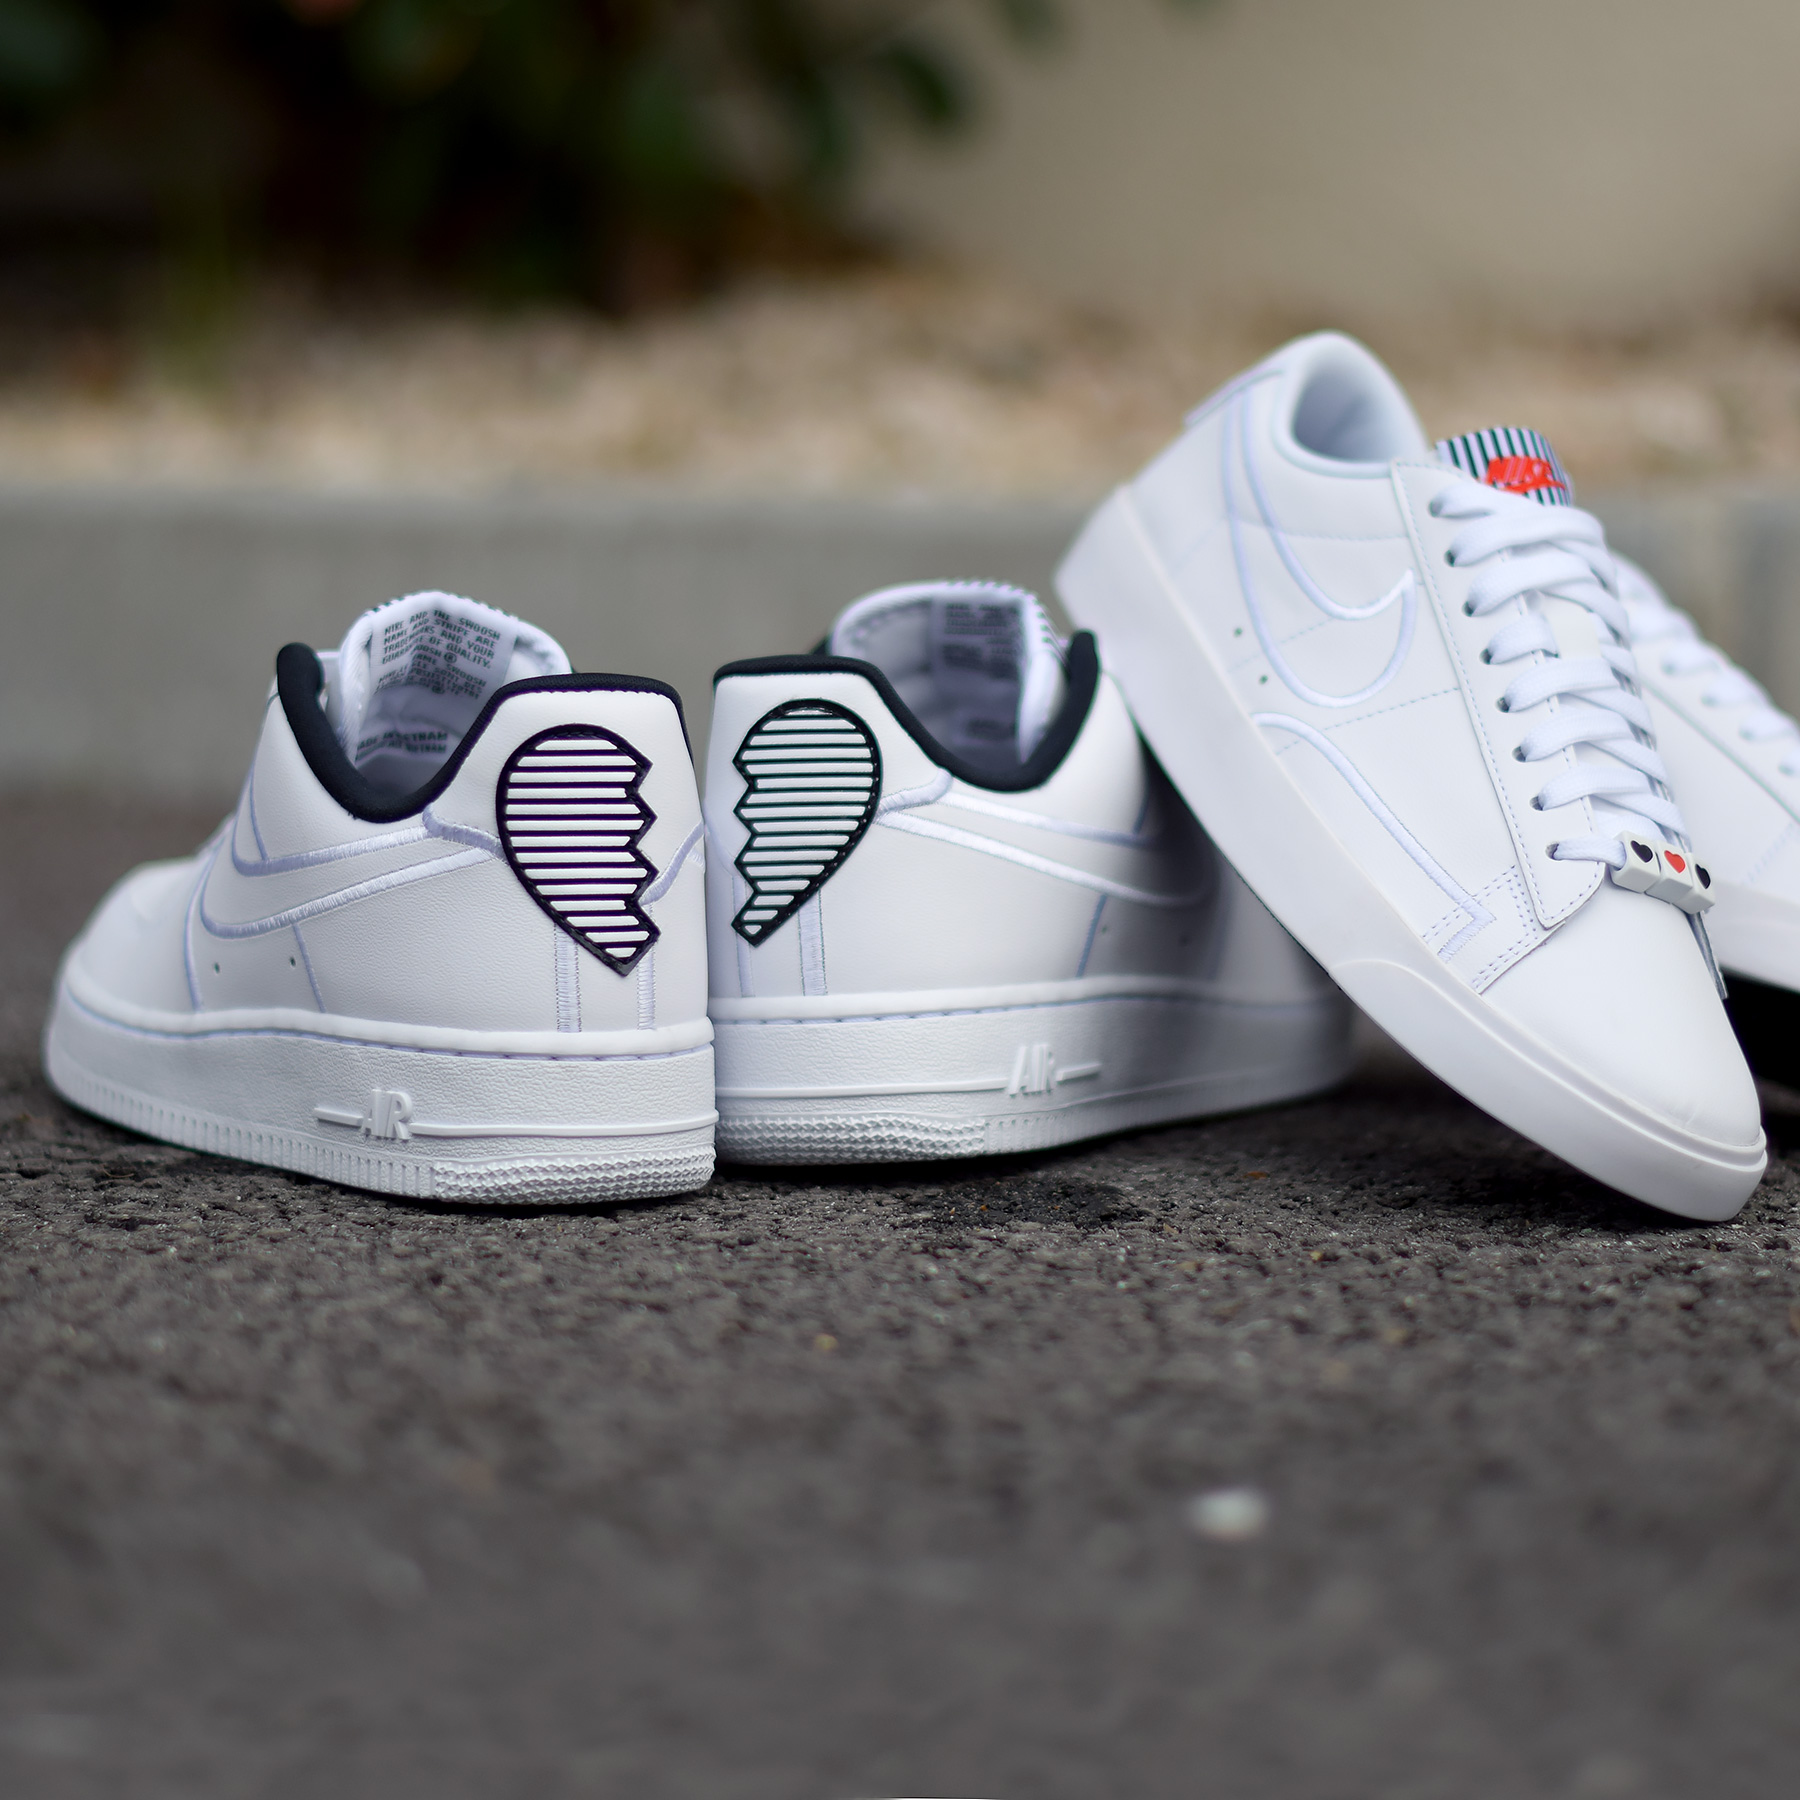 Nike air valentines day. Nike Air Force Heart. Nike Air Force 1 Heart. Nike Air Force 1 Low Wmns “Valentines Day”. Nike Air Force 1 Low Valentine.